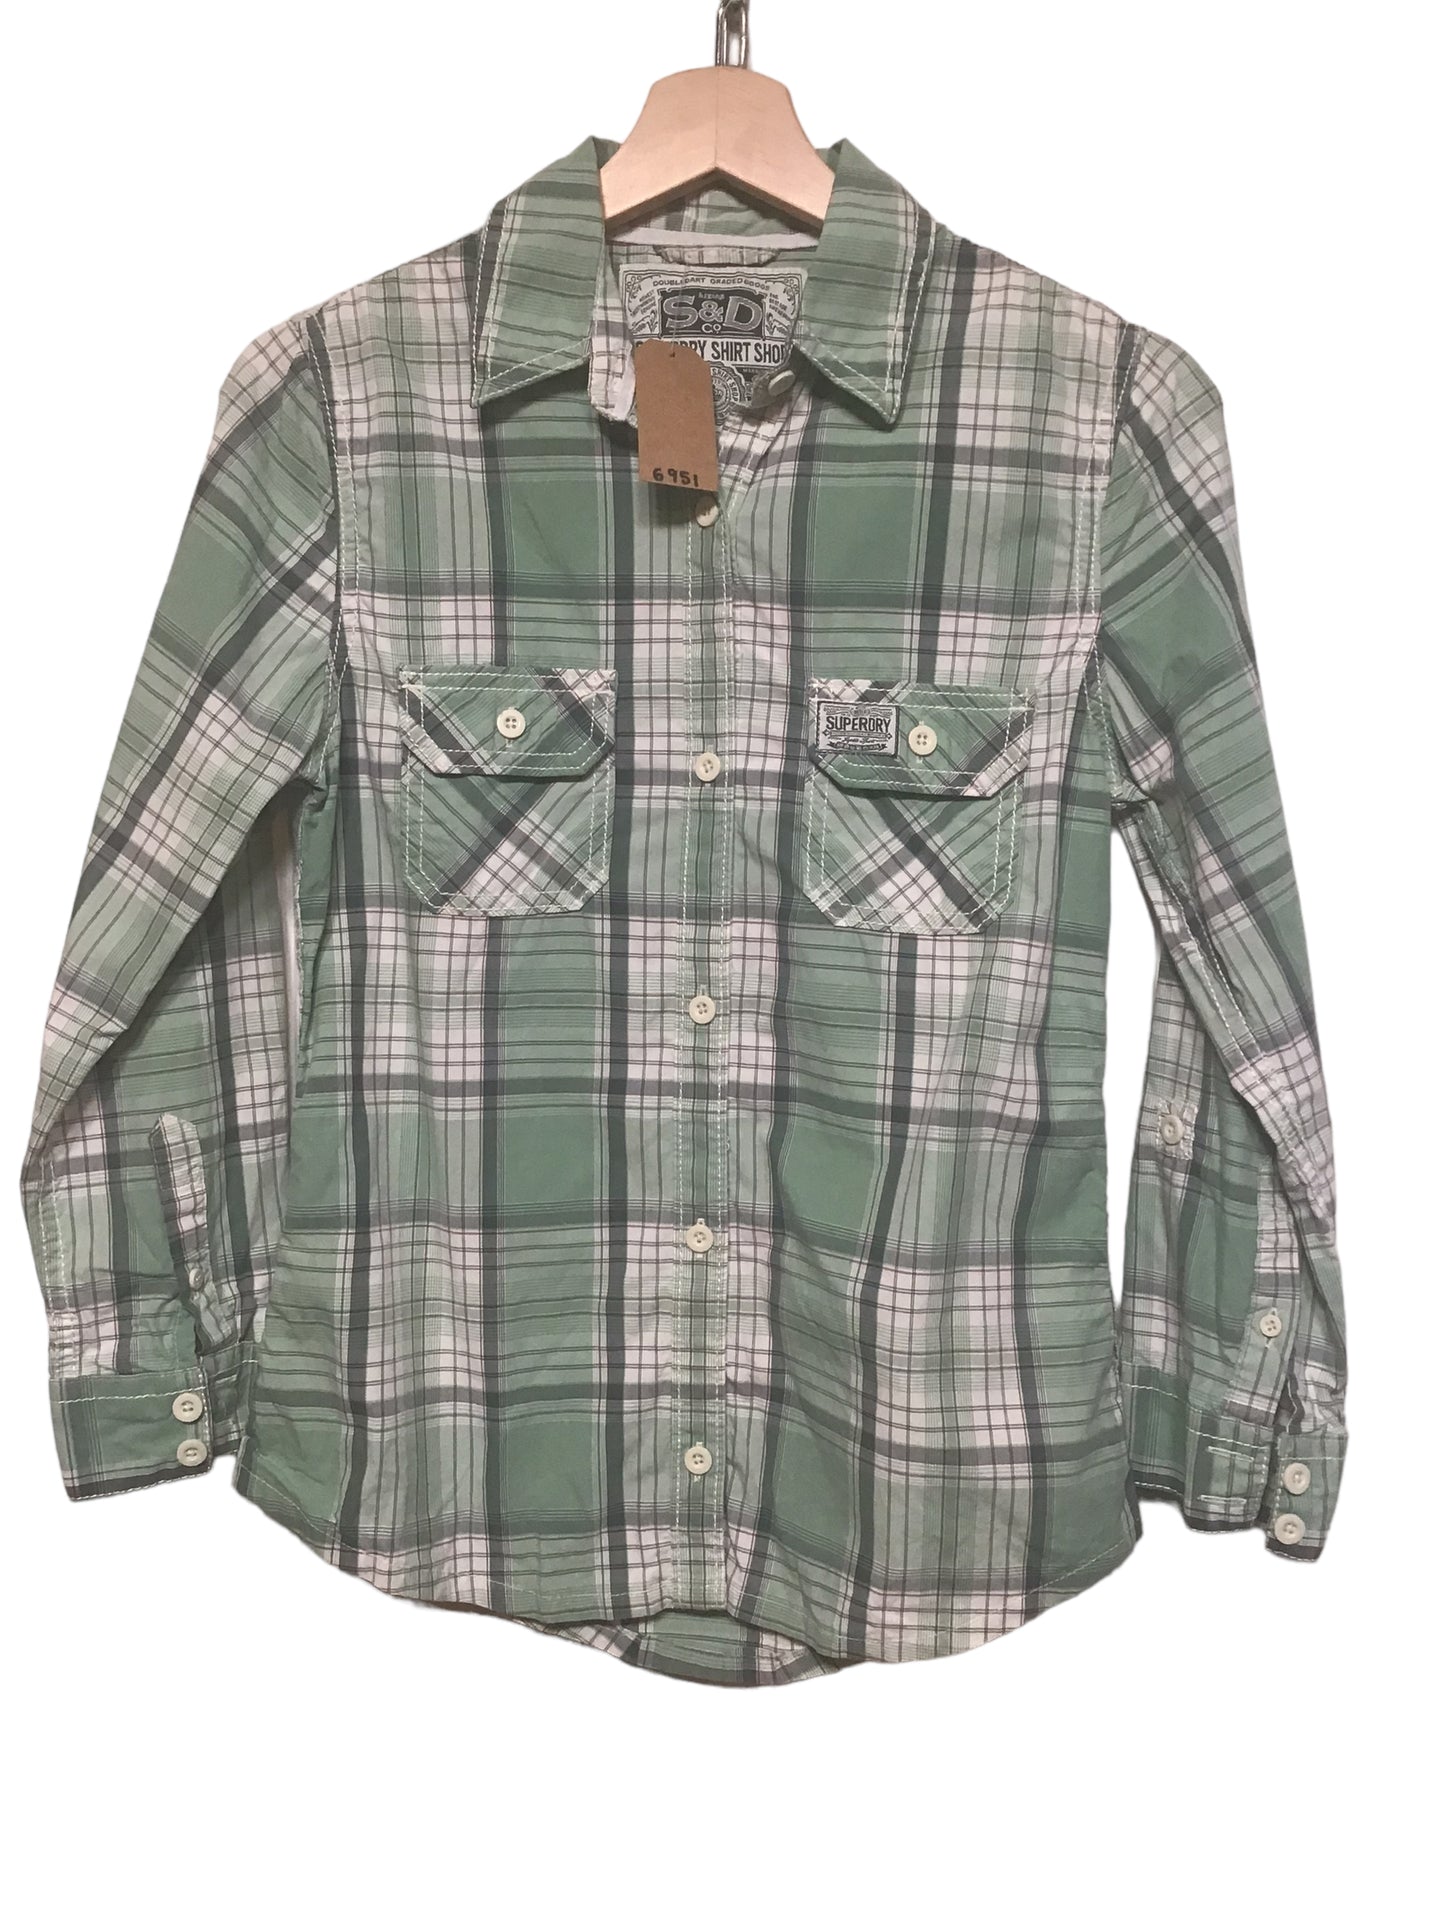 Superdry Shirt (Size S)